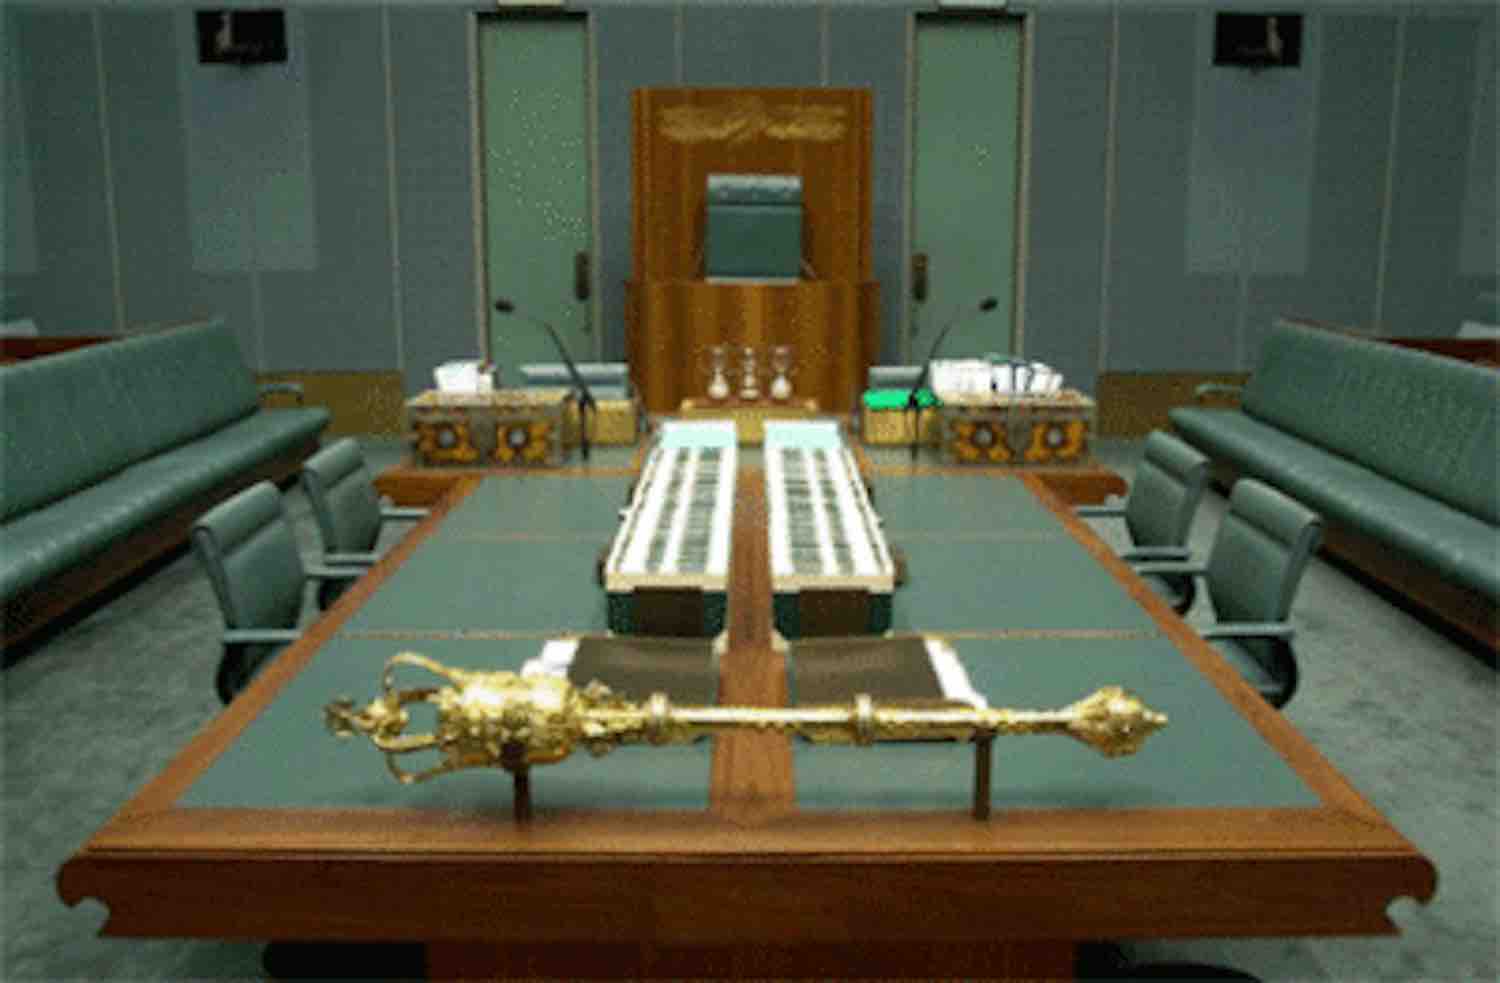 COVID-19: Lagos Assembly passes law to jail lockdown offenders